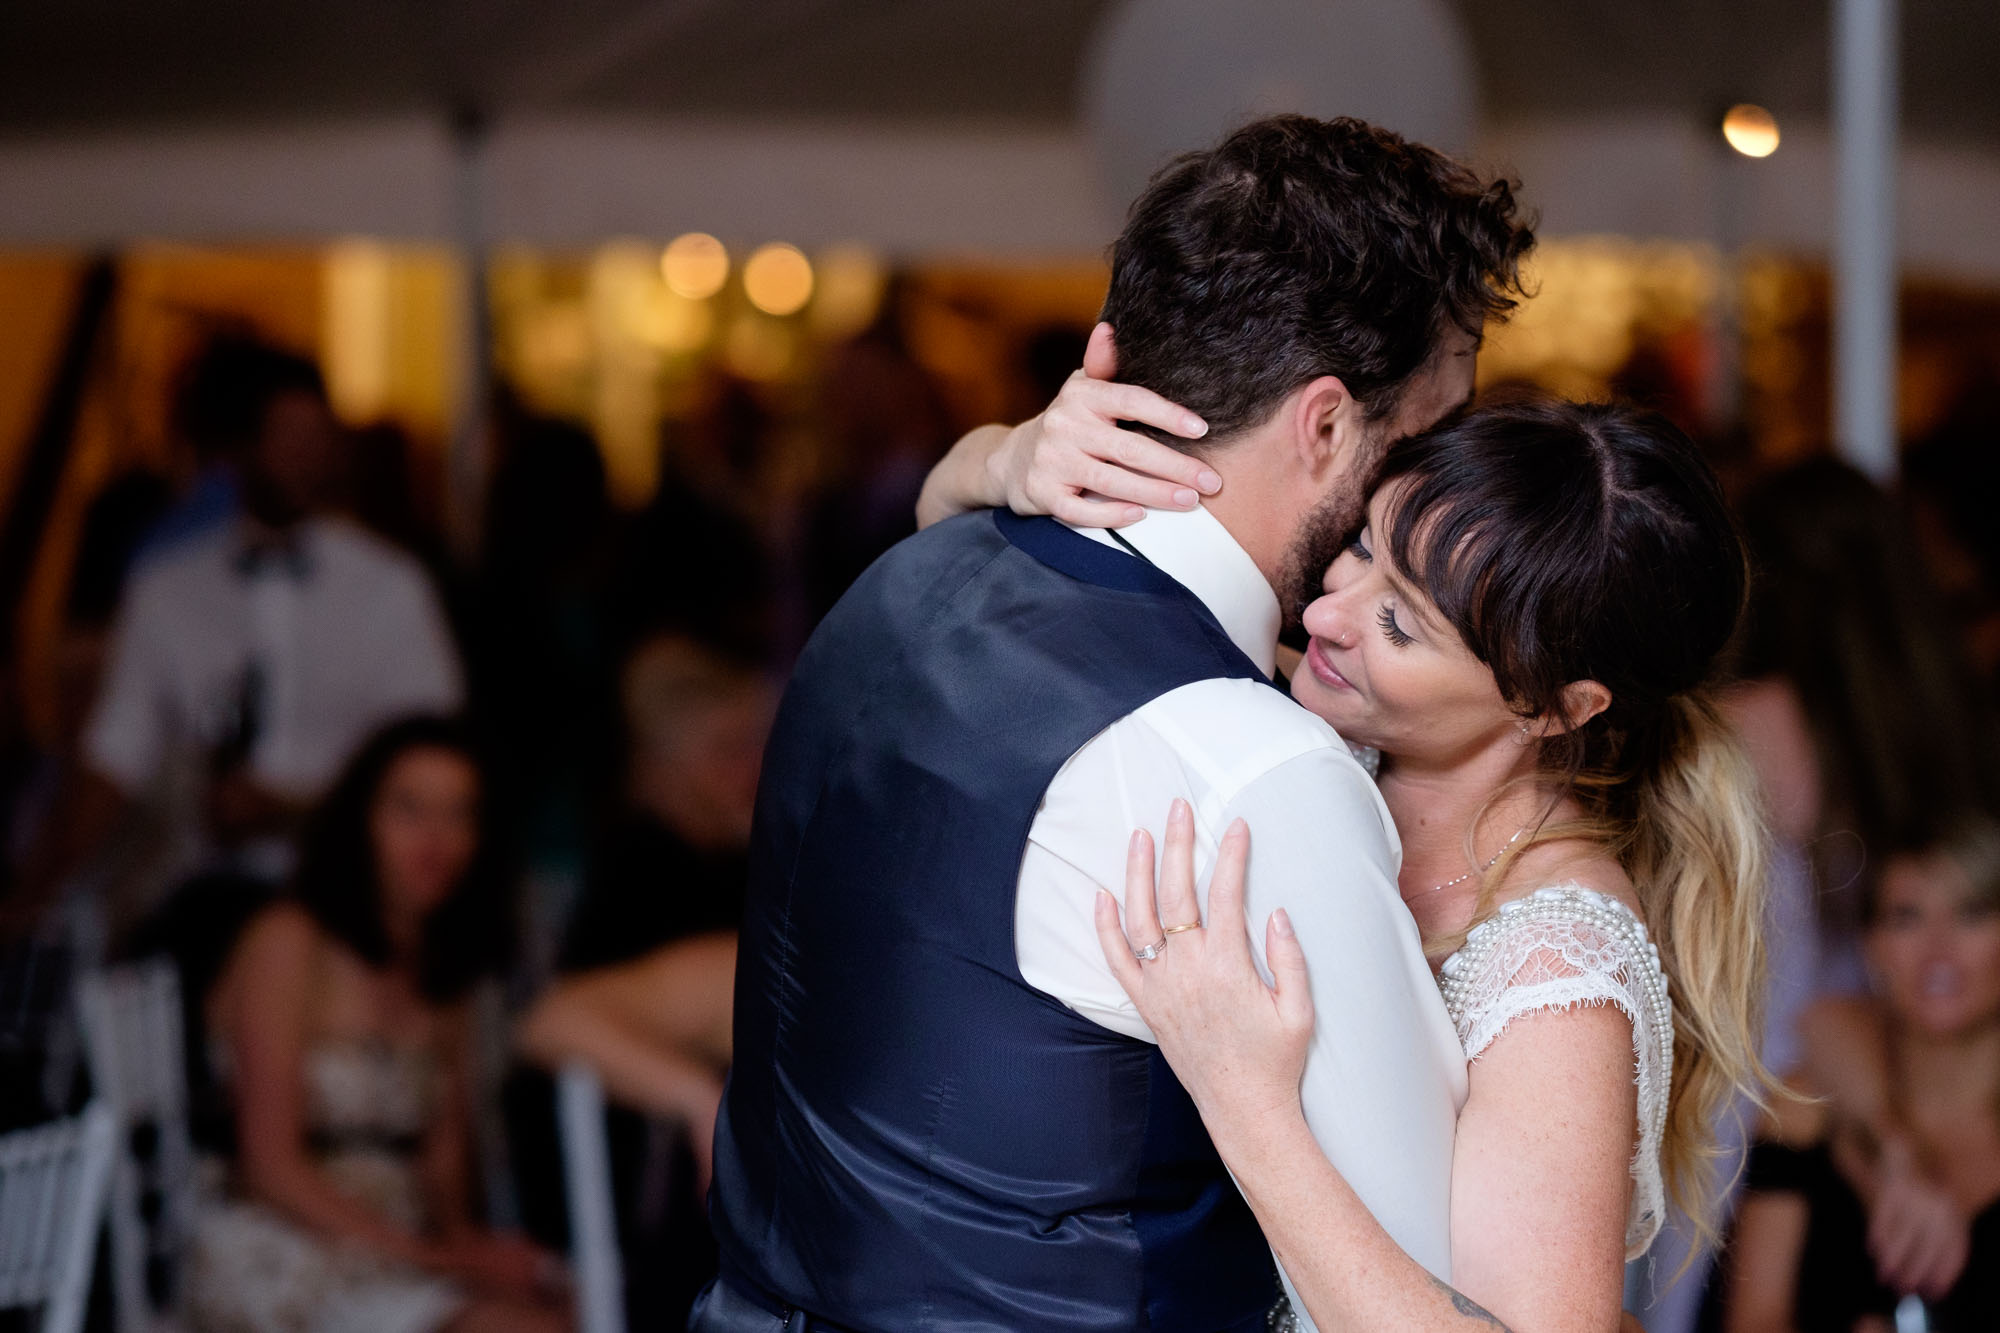  Kristin and Adam enjoy their fist dance as a newly married couple during their backyard wedding reception in Barrie, Ontario. &nbsp;Photograph by Scott Williams. 